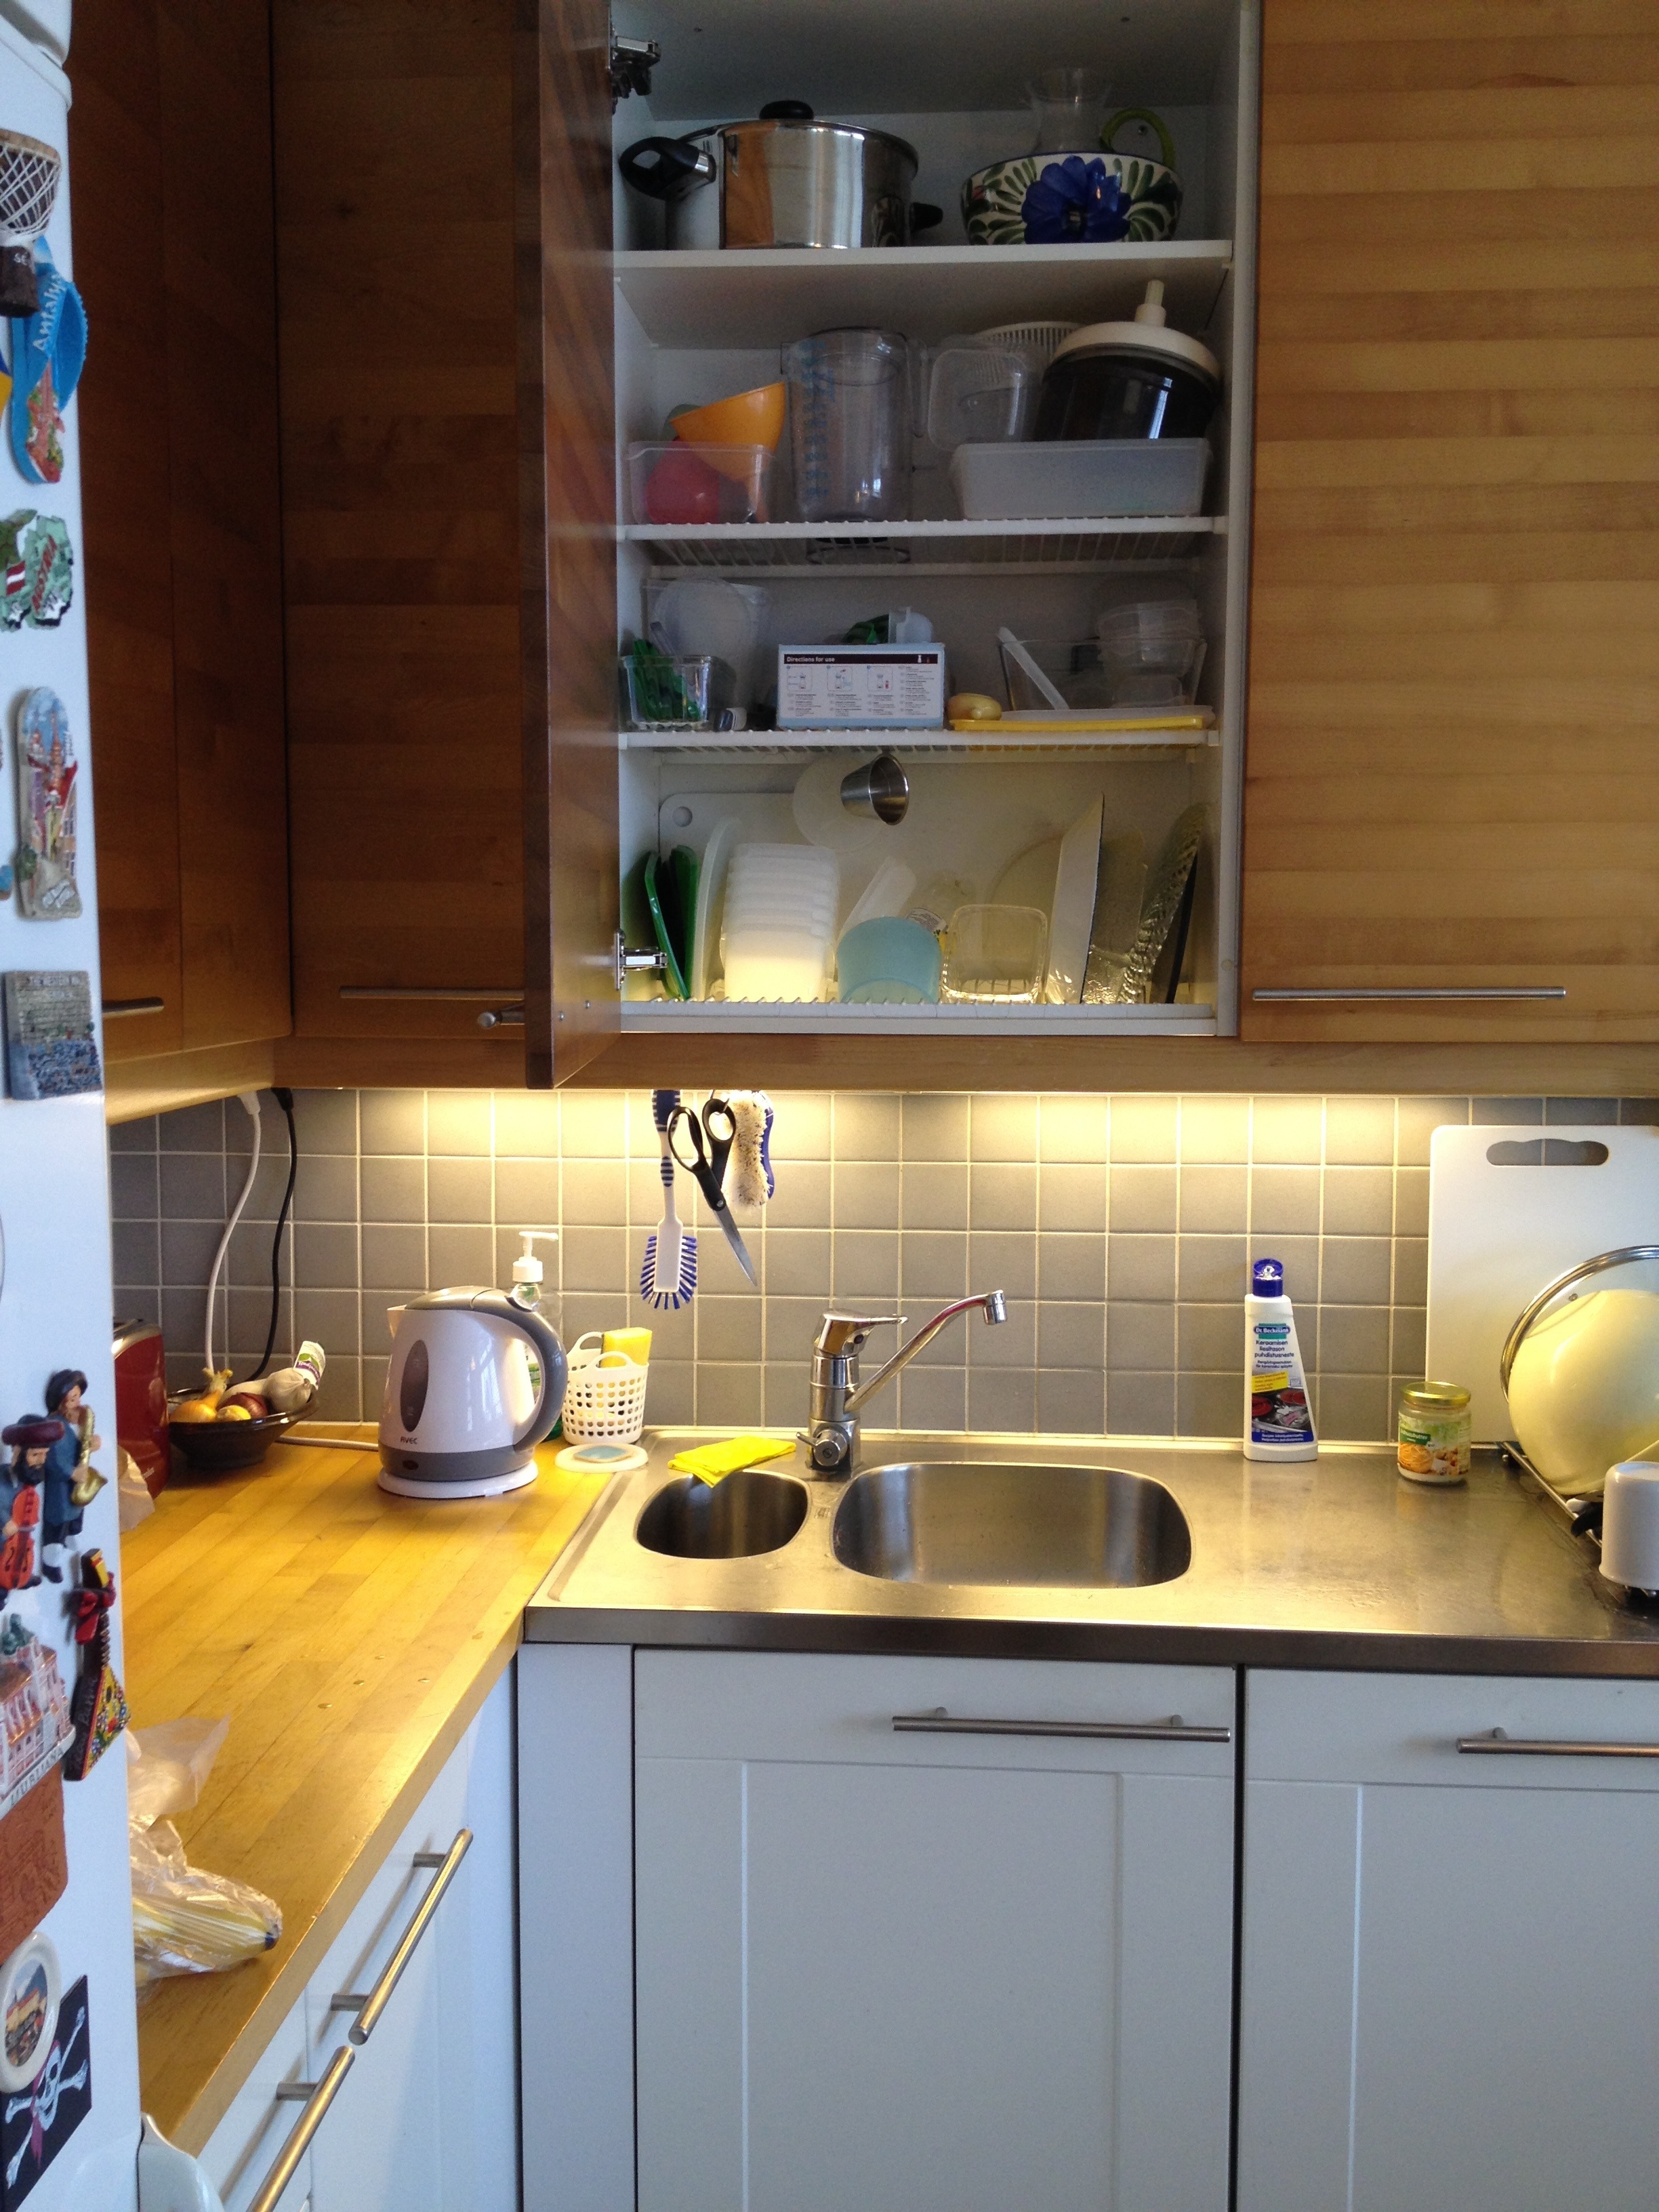 Finnish Dish Drying Closets: What They Are and Where to Buy One